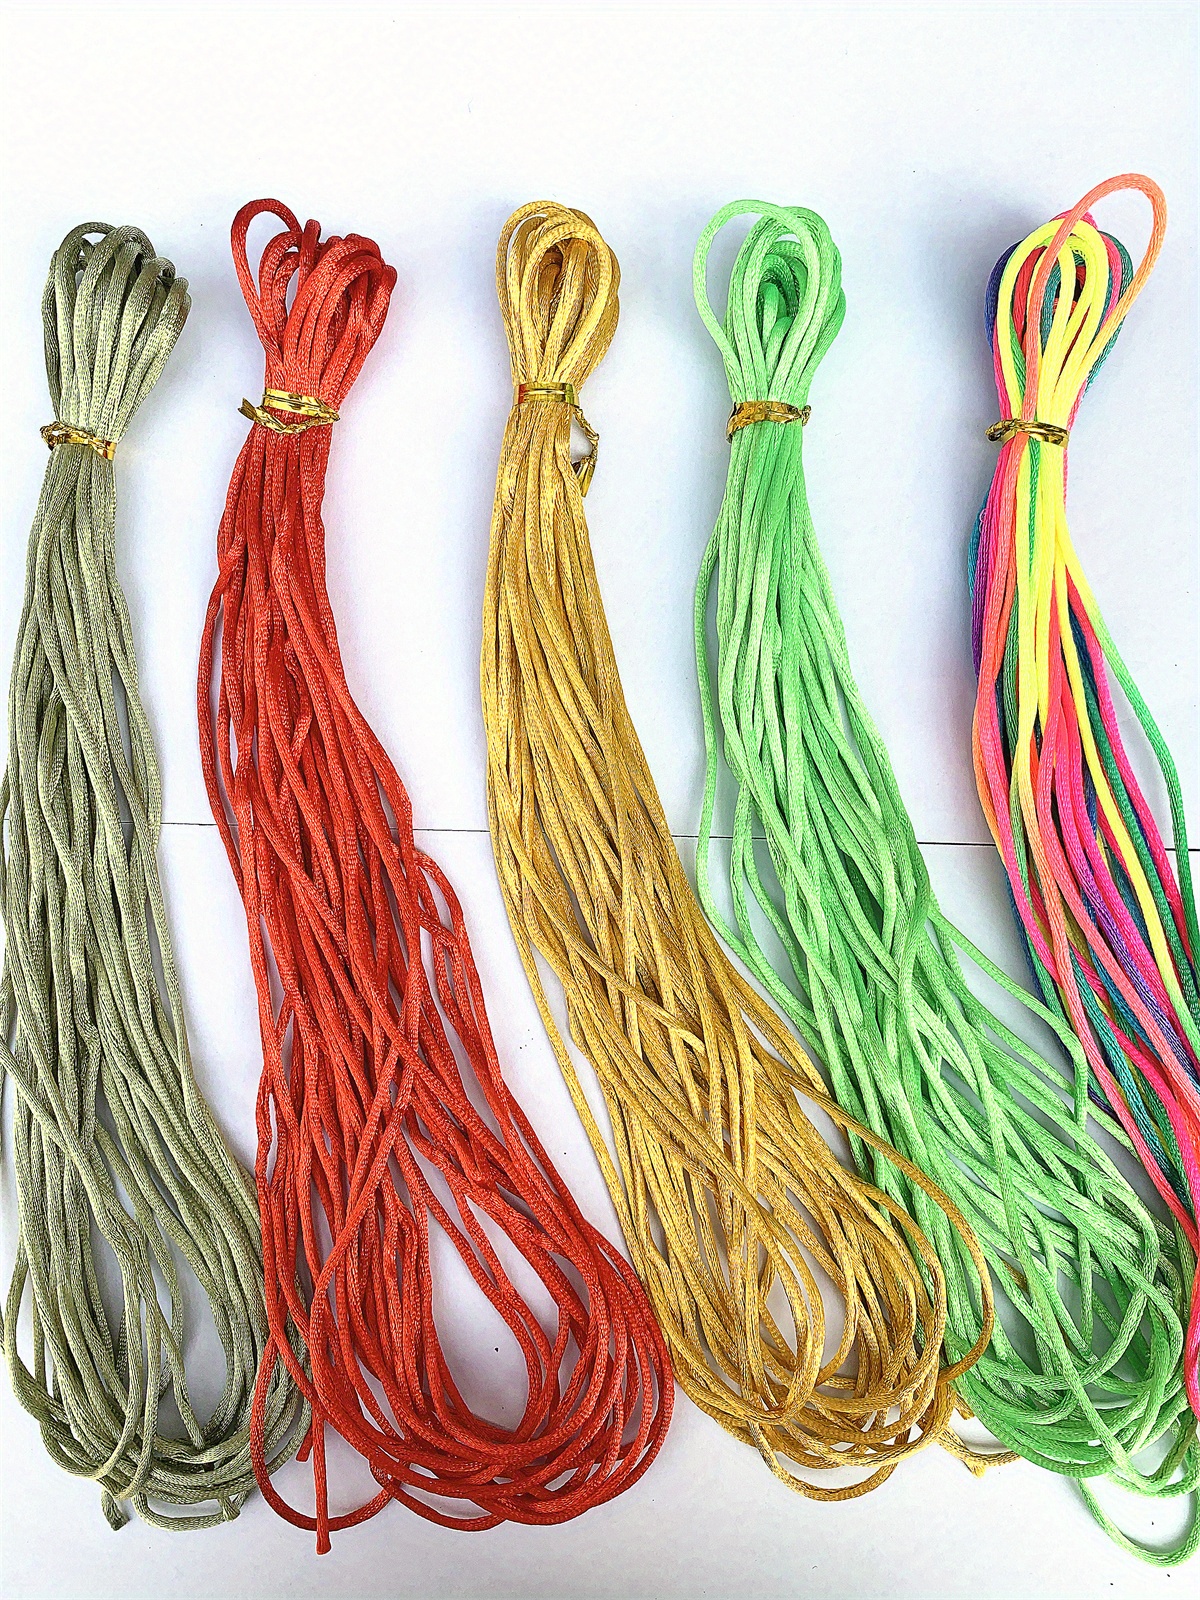 Patterned 4mm Nylon Cord | 4mm Nylon Rope By The Yard